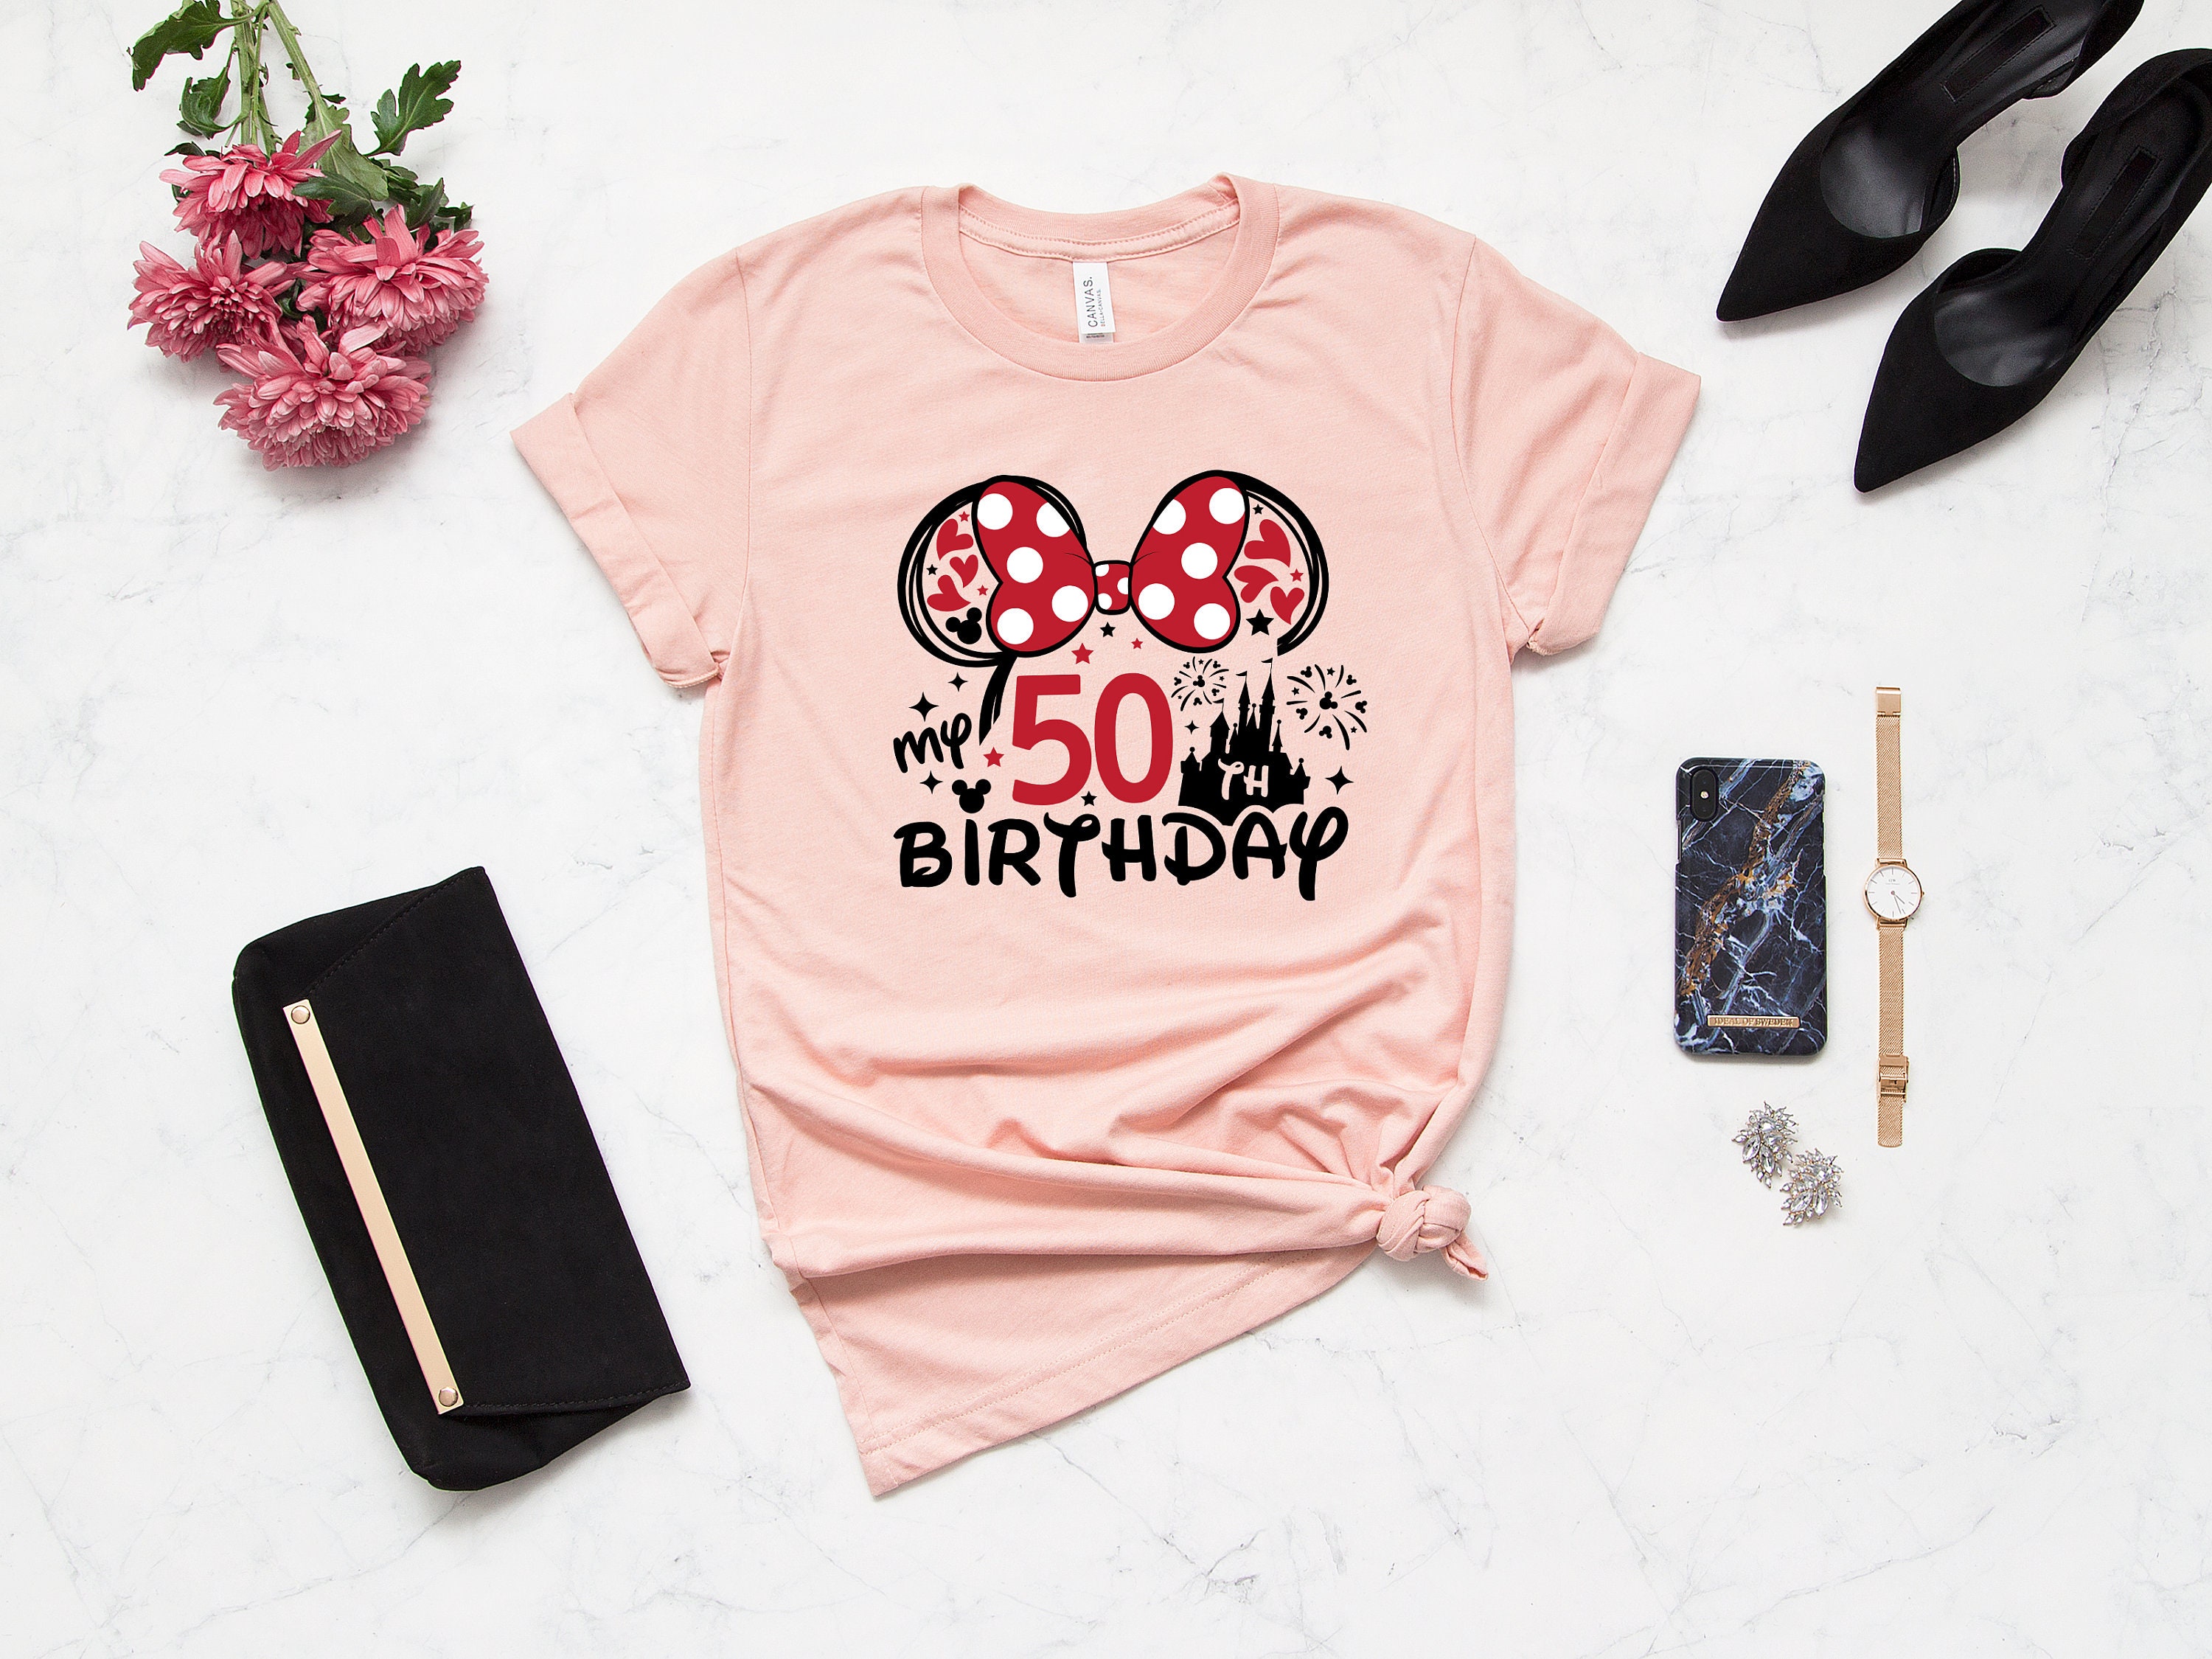 Discover 50th Birthday Shirt, Minnie 50 Years Old T-Shirt, Gift For 50th Birthday, 50th Birthday Shirt